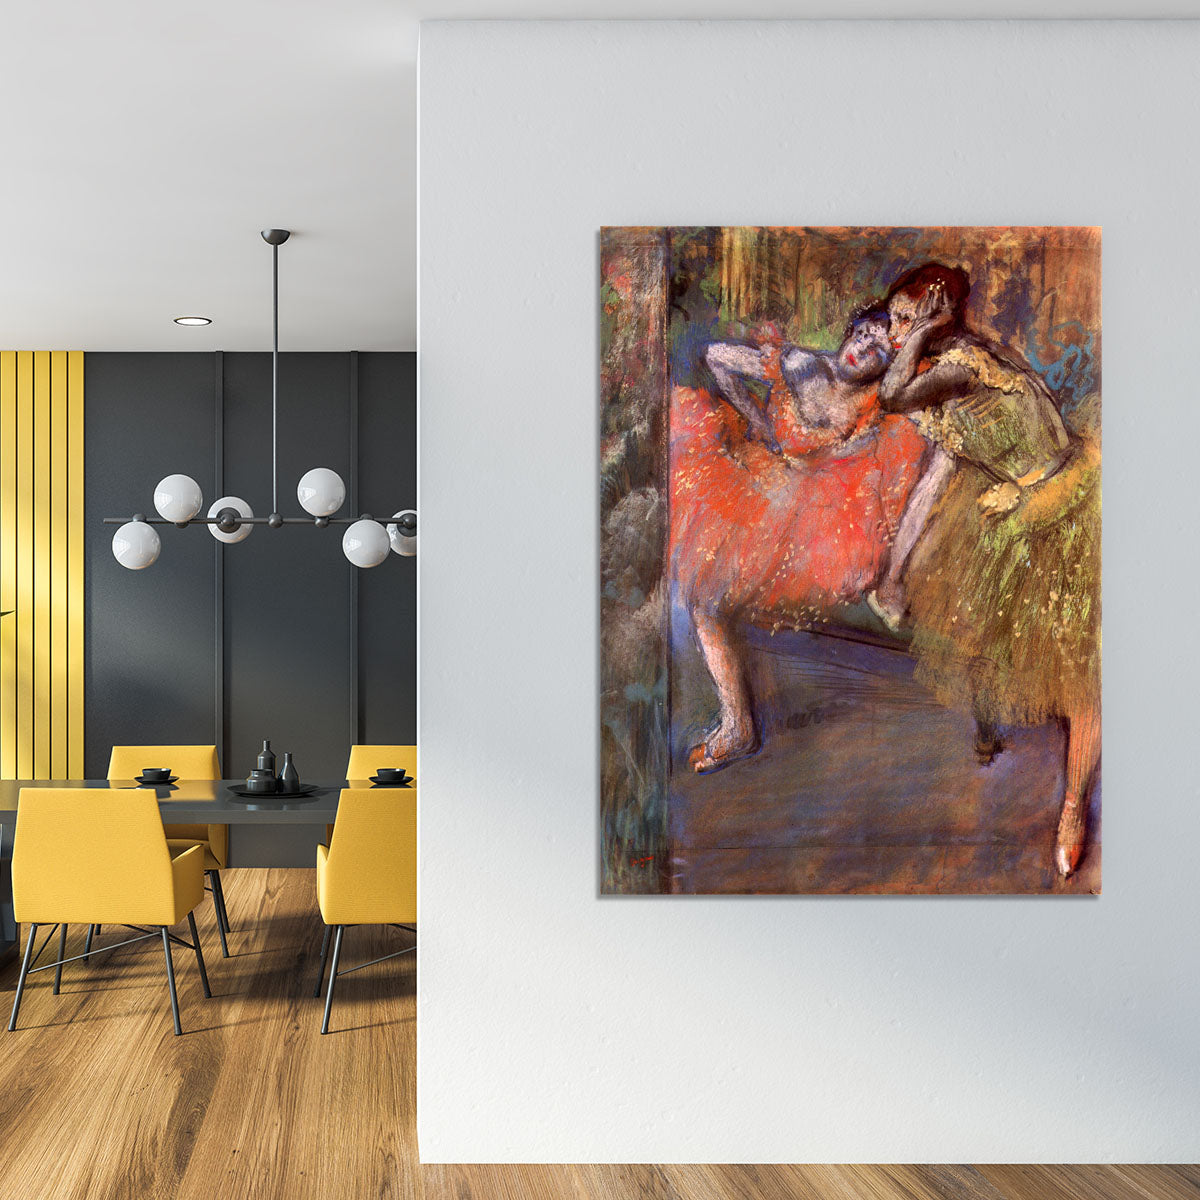 Two dancers behind the scenes by Degas Canvas Print or Poster - Canvas Art Rocks - 4